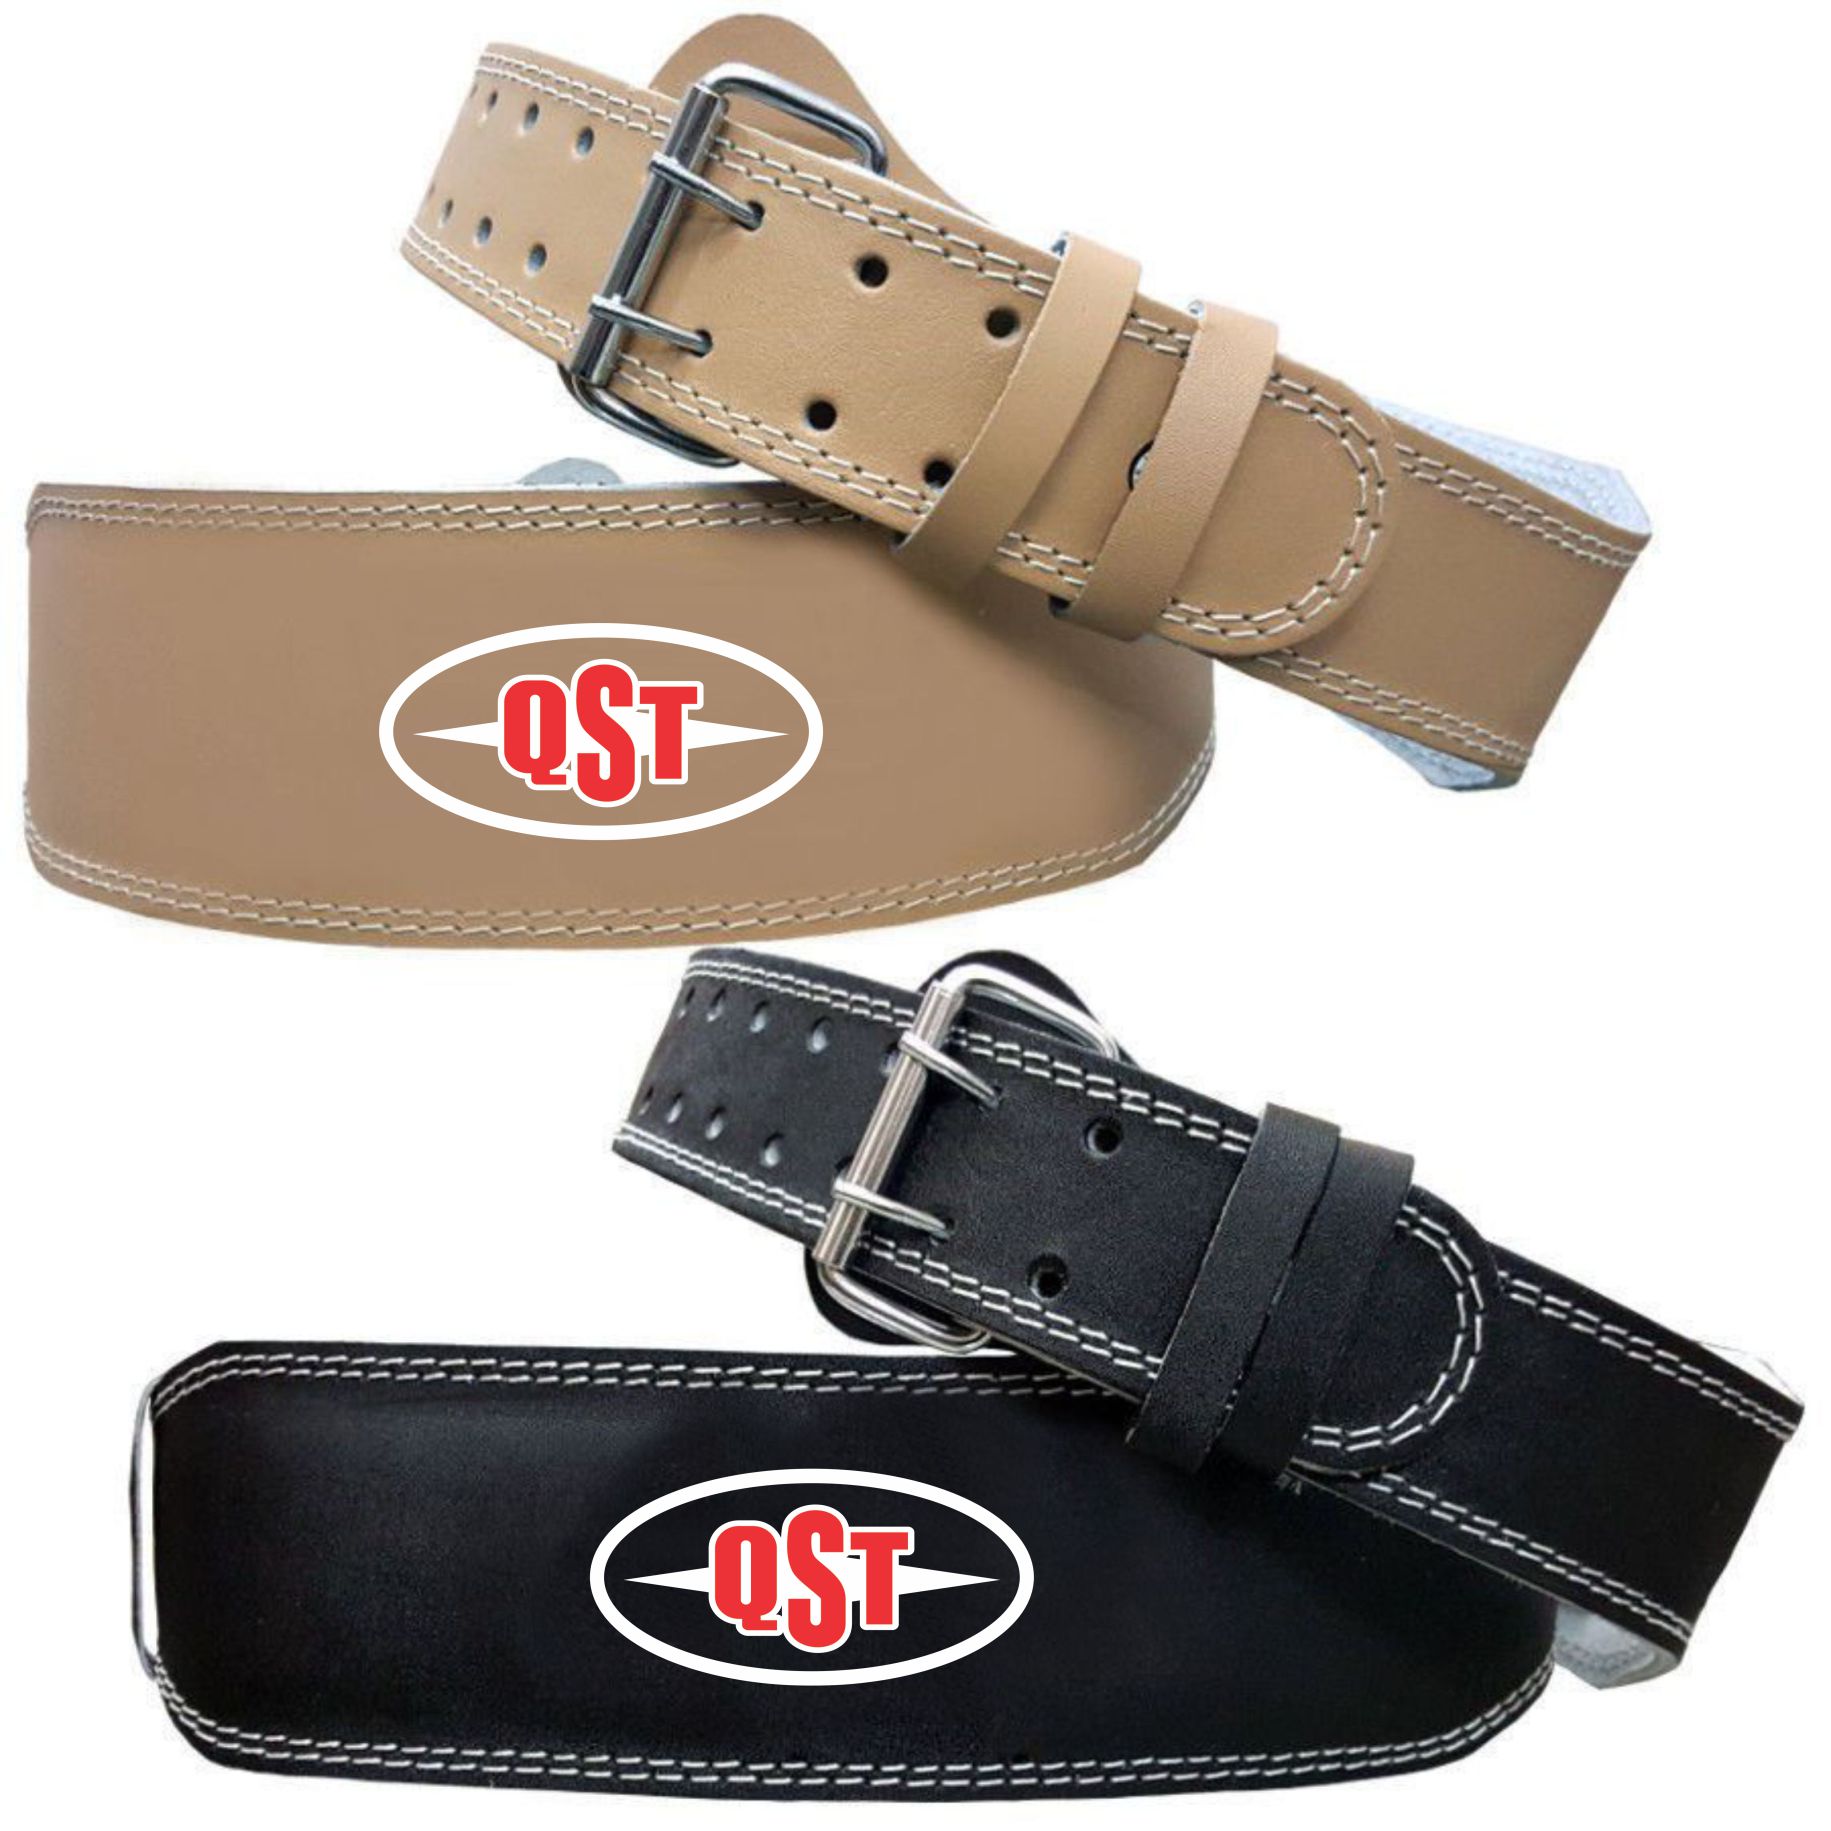 Leather Weightlifting Belt - ACS-1547